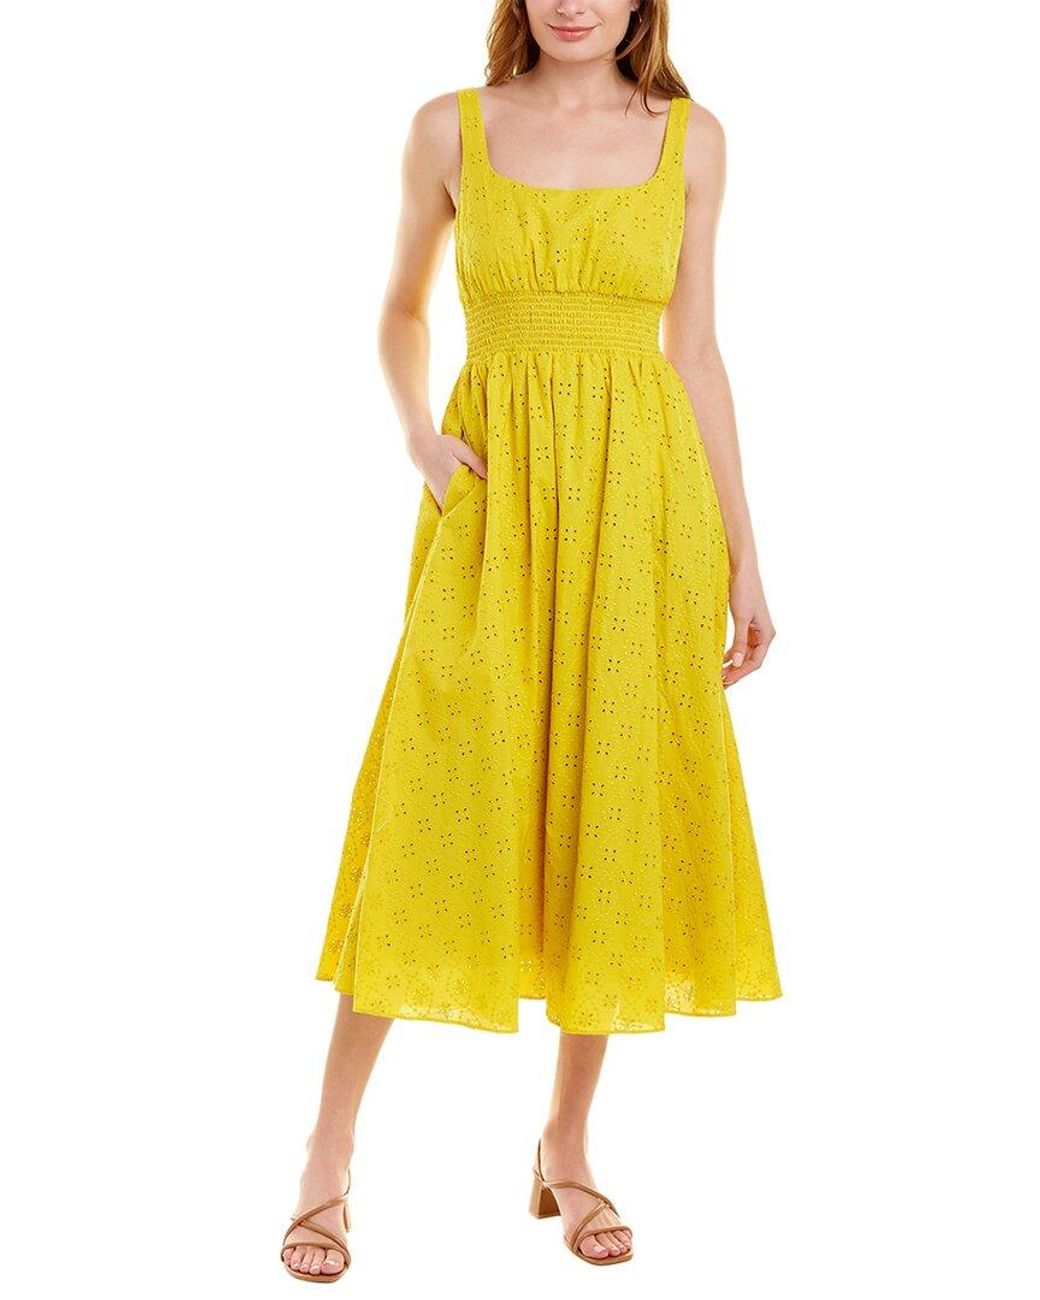 PEARL BY LELA ROSE Floral Eyelet Midi Dress in Yellow | Lyst